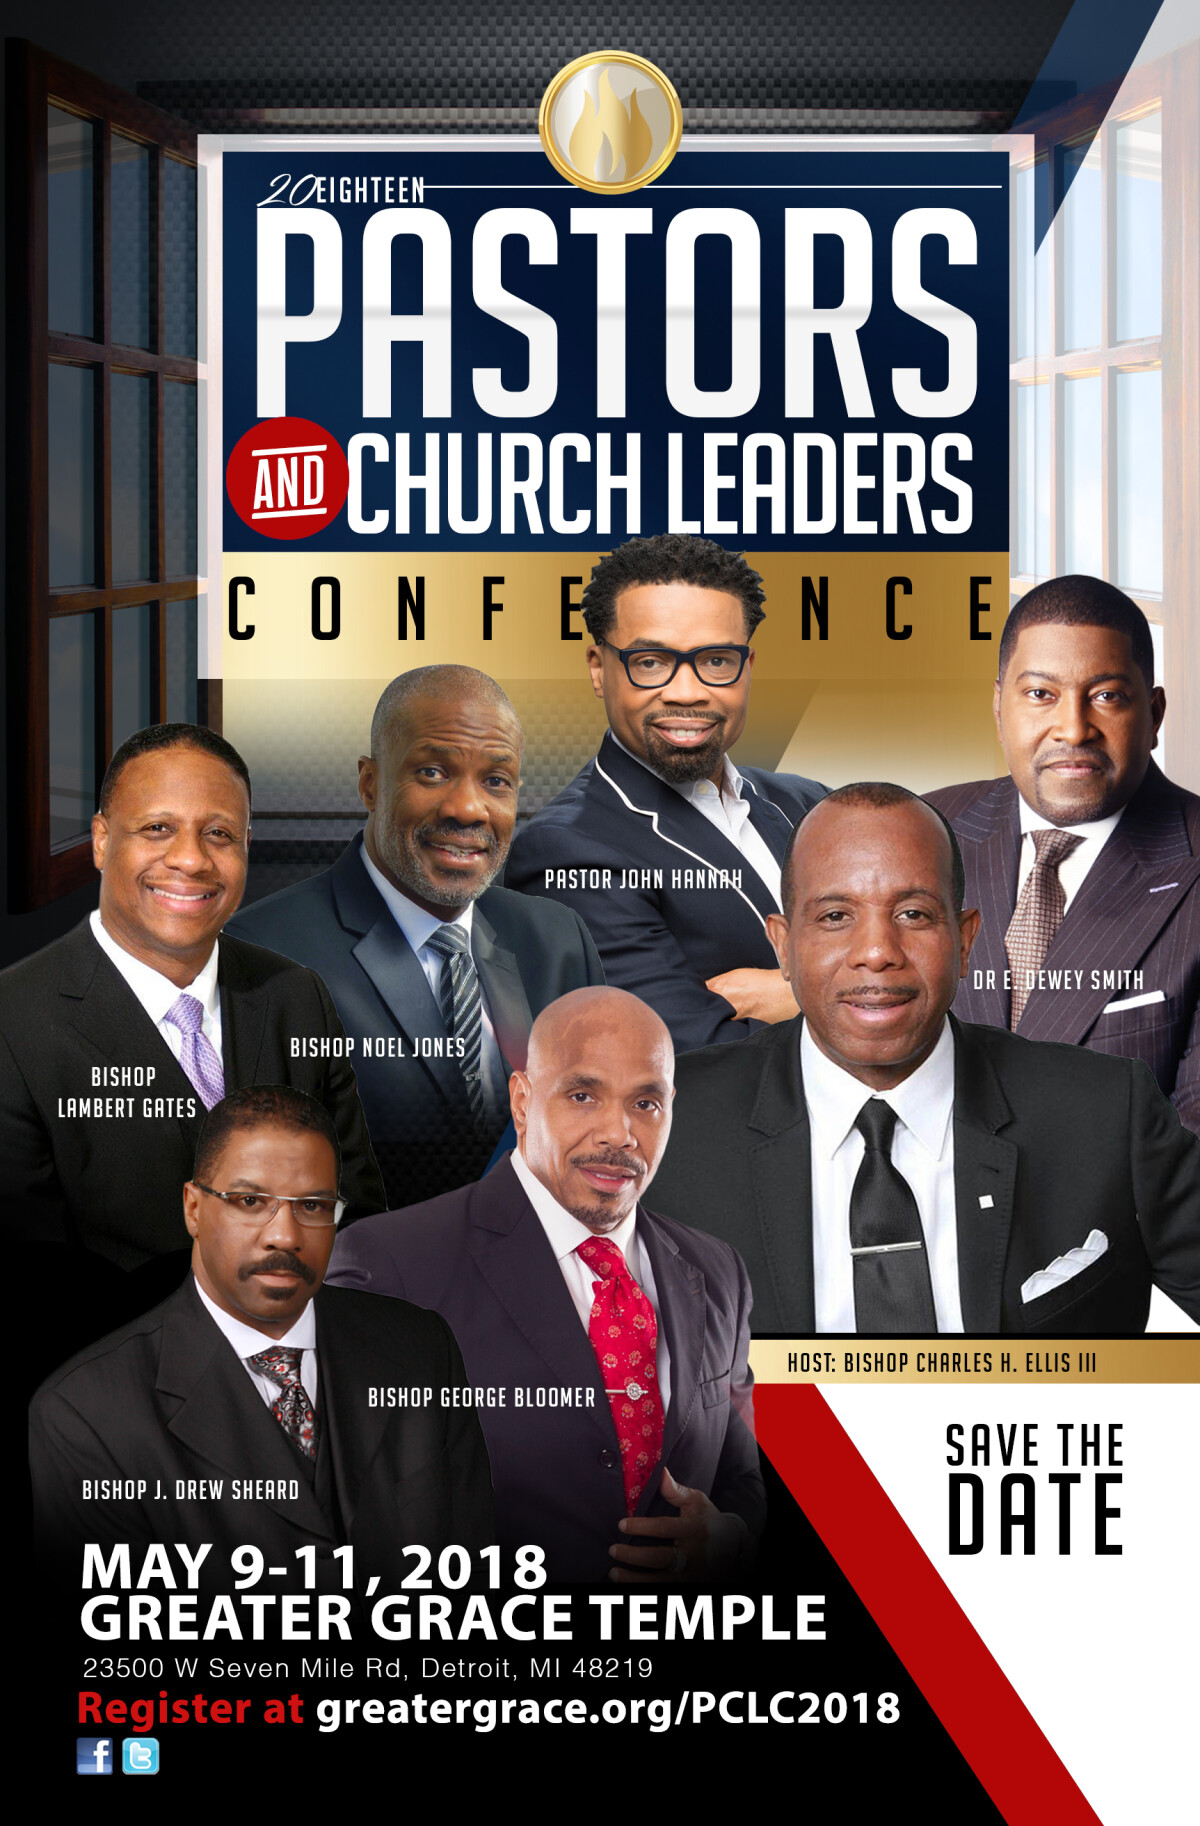 Pastors and Church Leaders' Conference